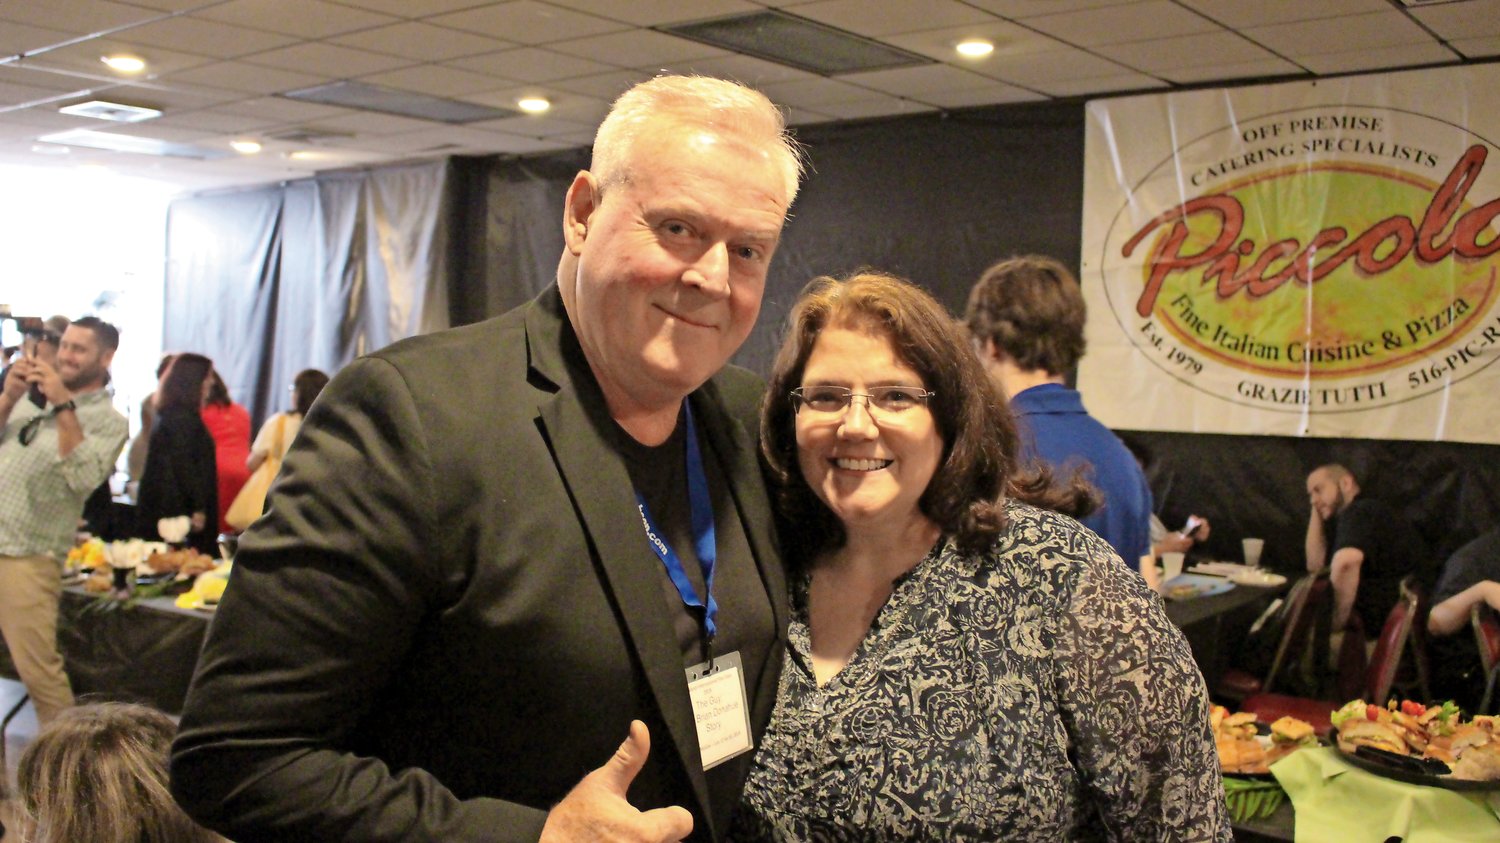 Also featured at the festival were Brian and Lori Donohue, who screened their documentary “The Guy: The Brian Donohue Story.”